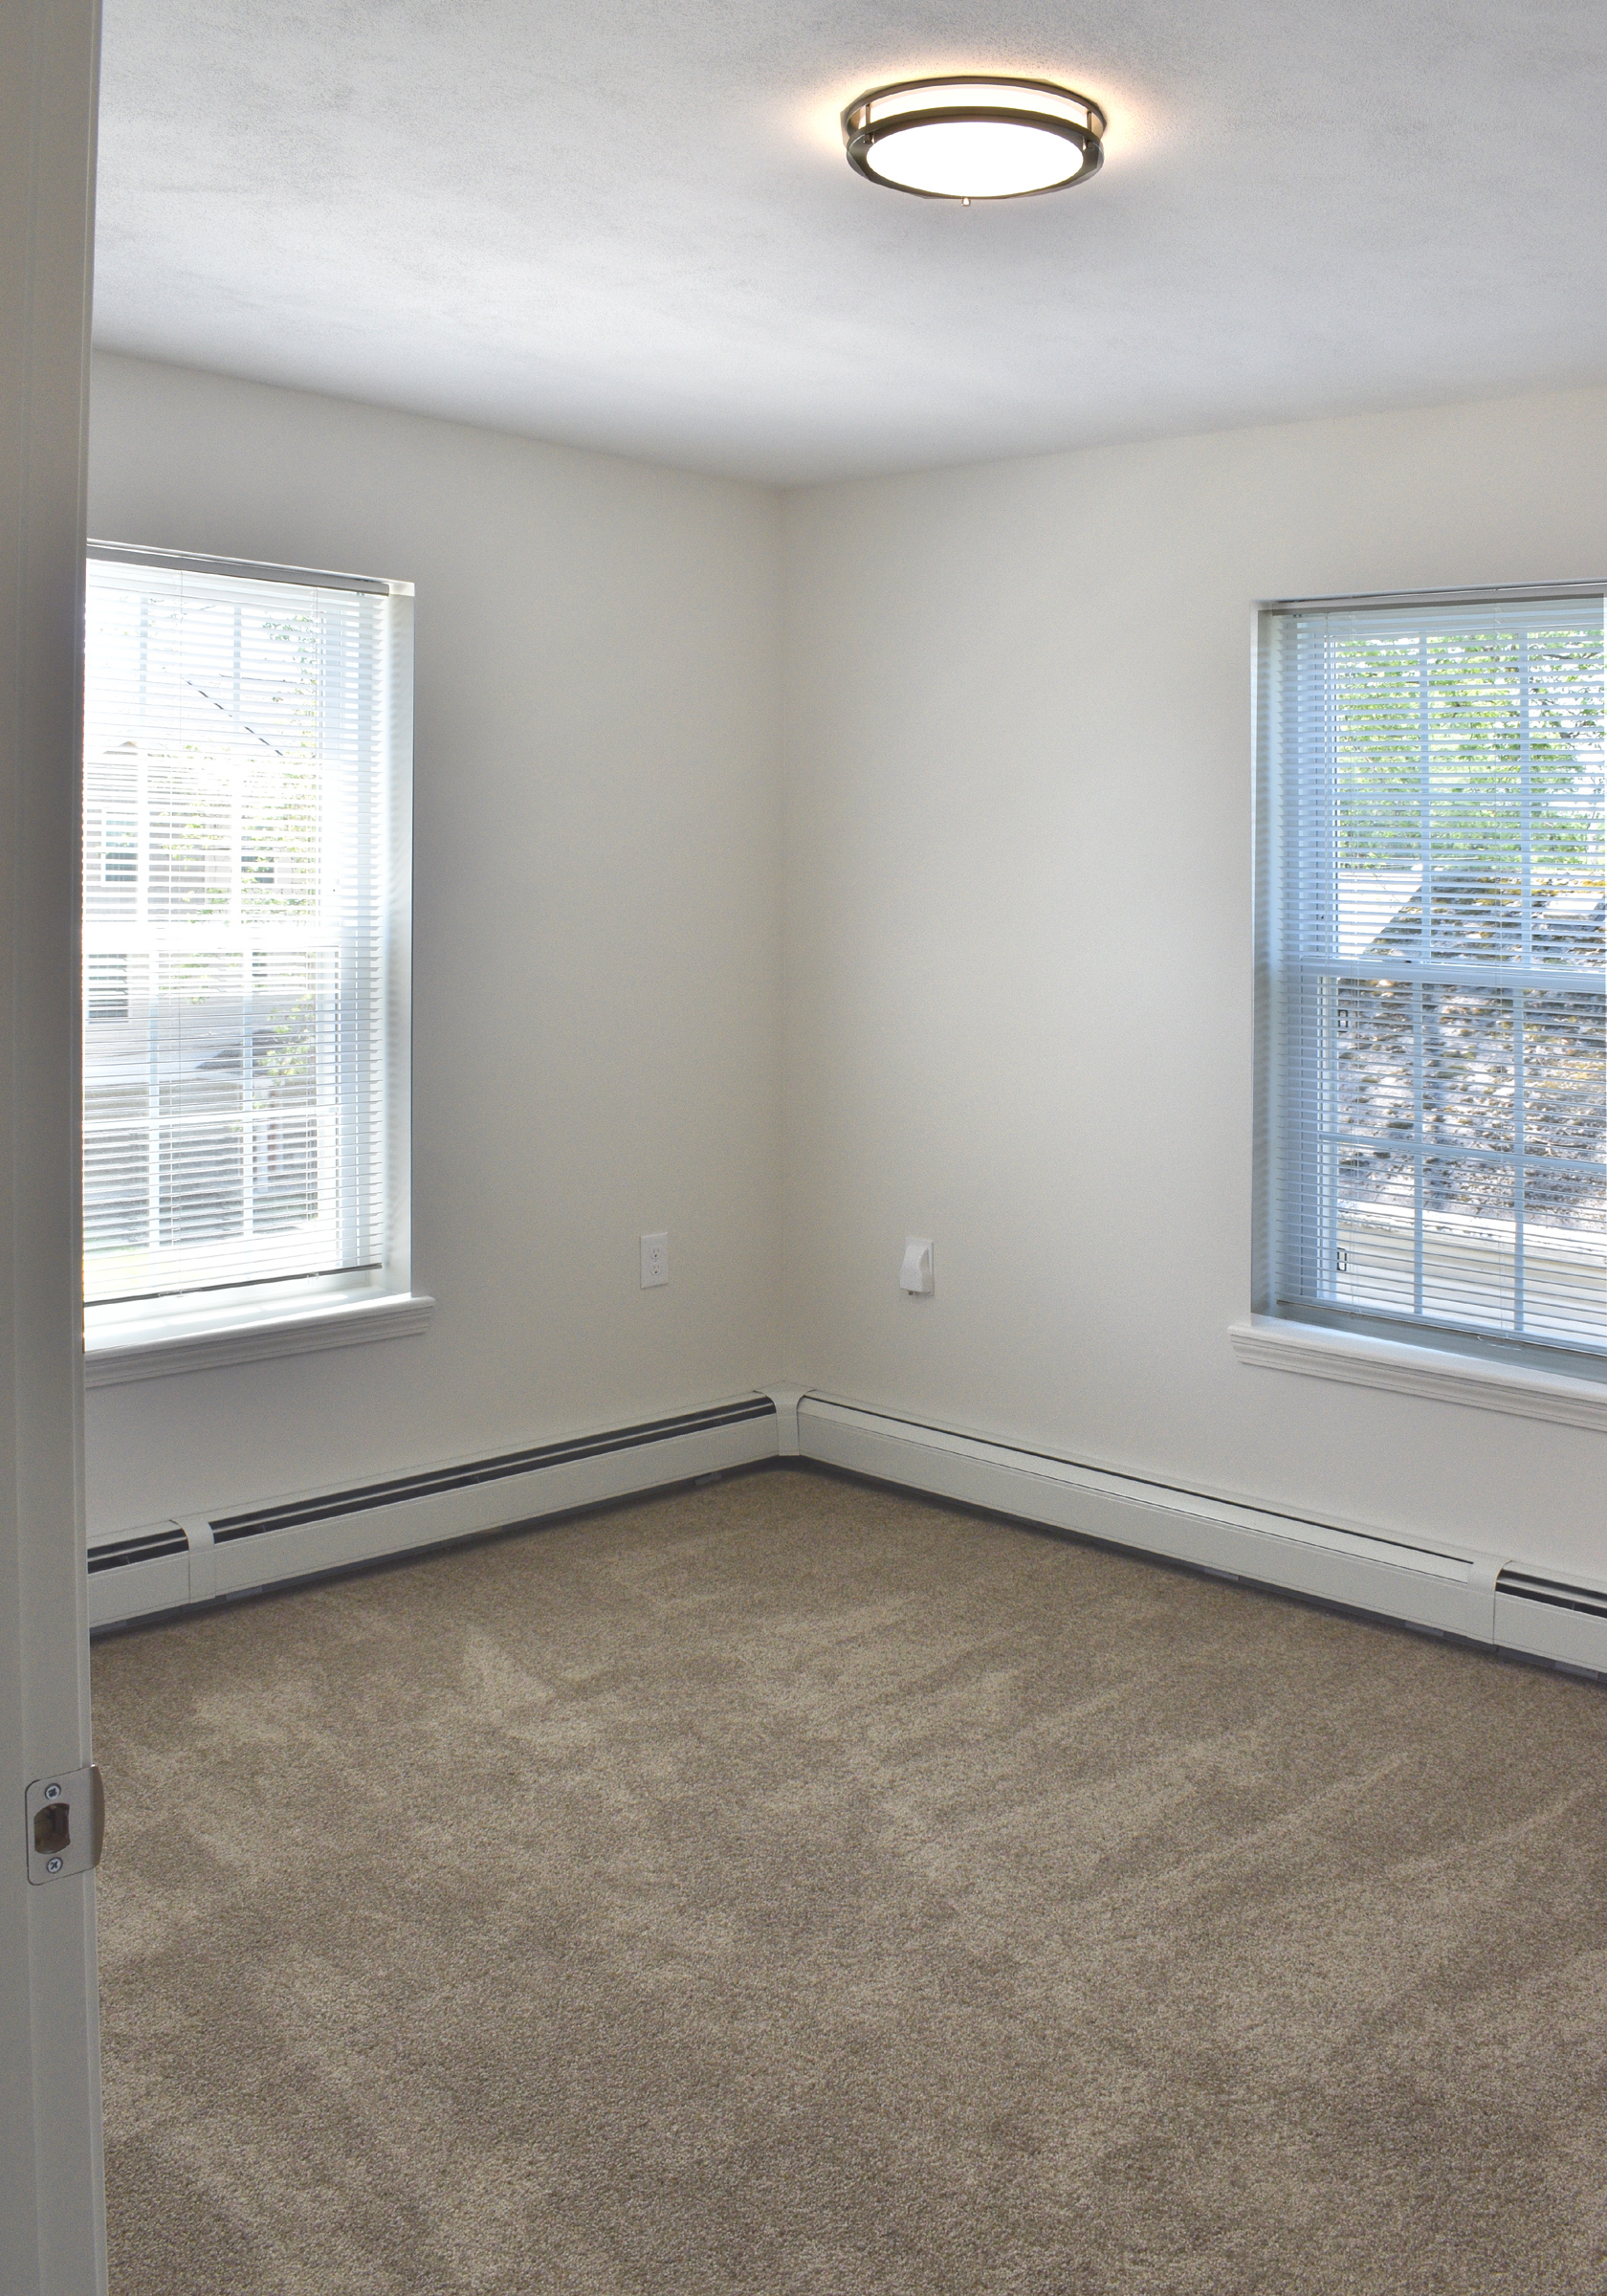 property management company client list syracuse ny bedroom view image of fairmont park